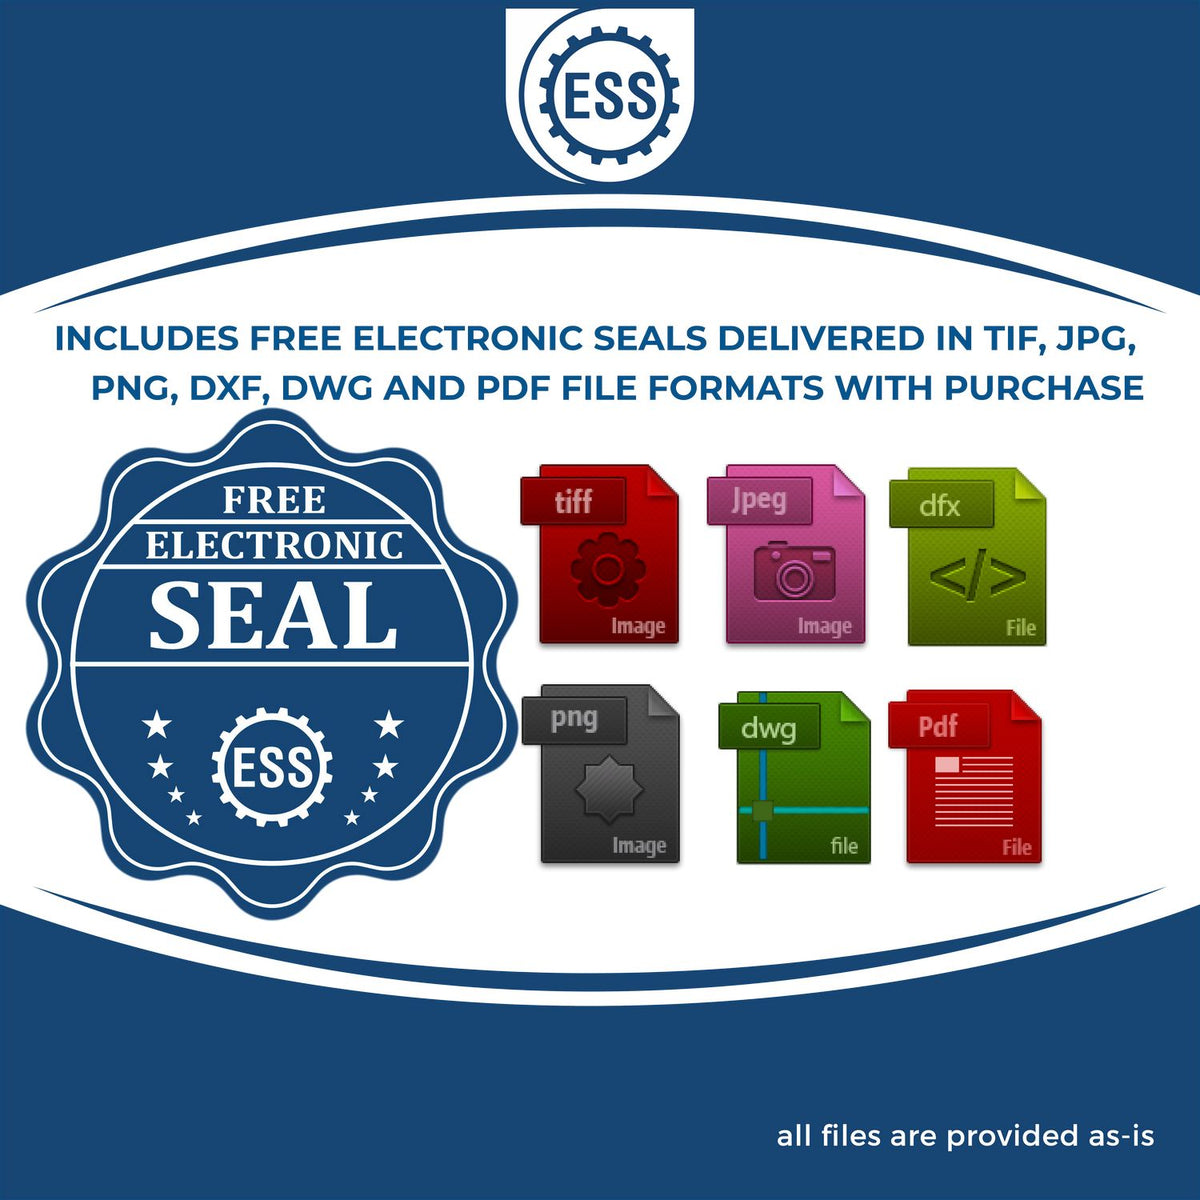 An infographic for the free electronic seal for the Arizona Geologist Desk Seal illustrating the different file type icons such as DXF, DWG, TIF, JPG and PNG.